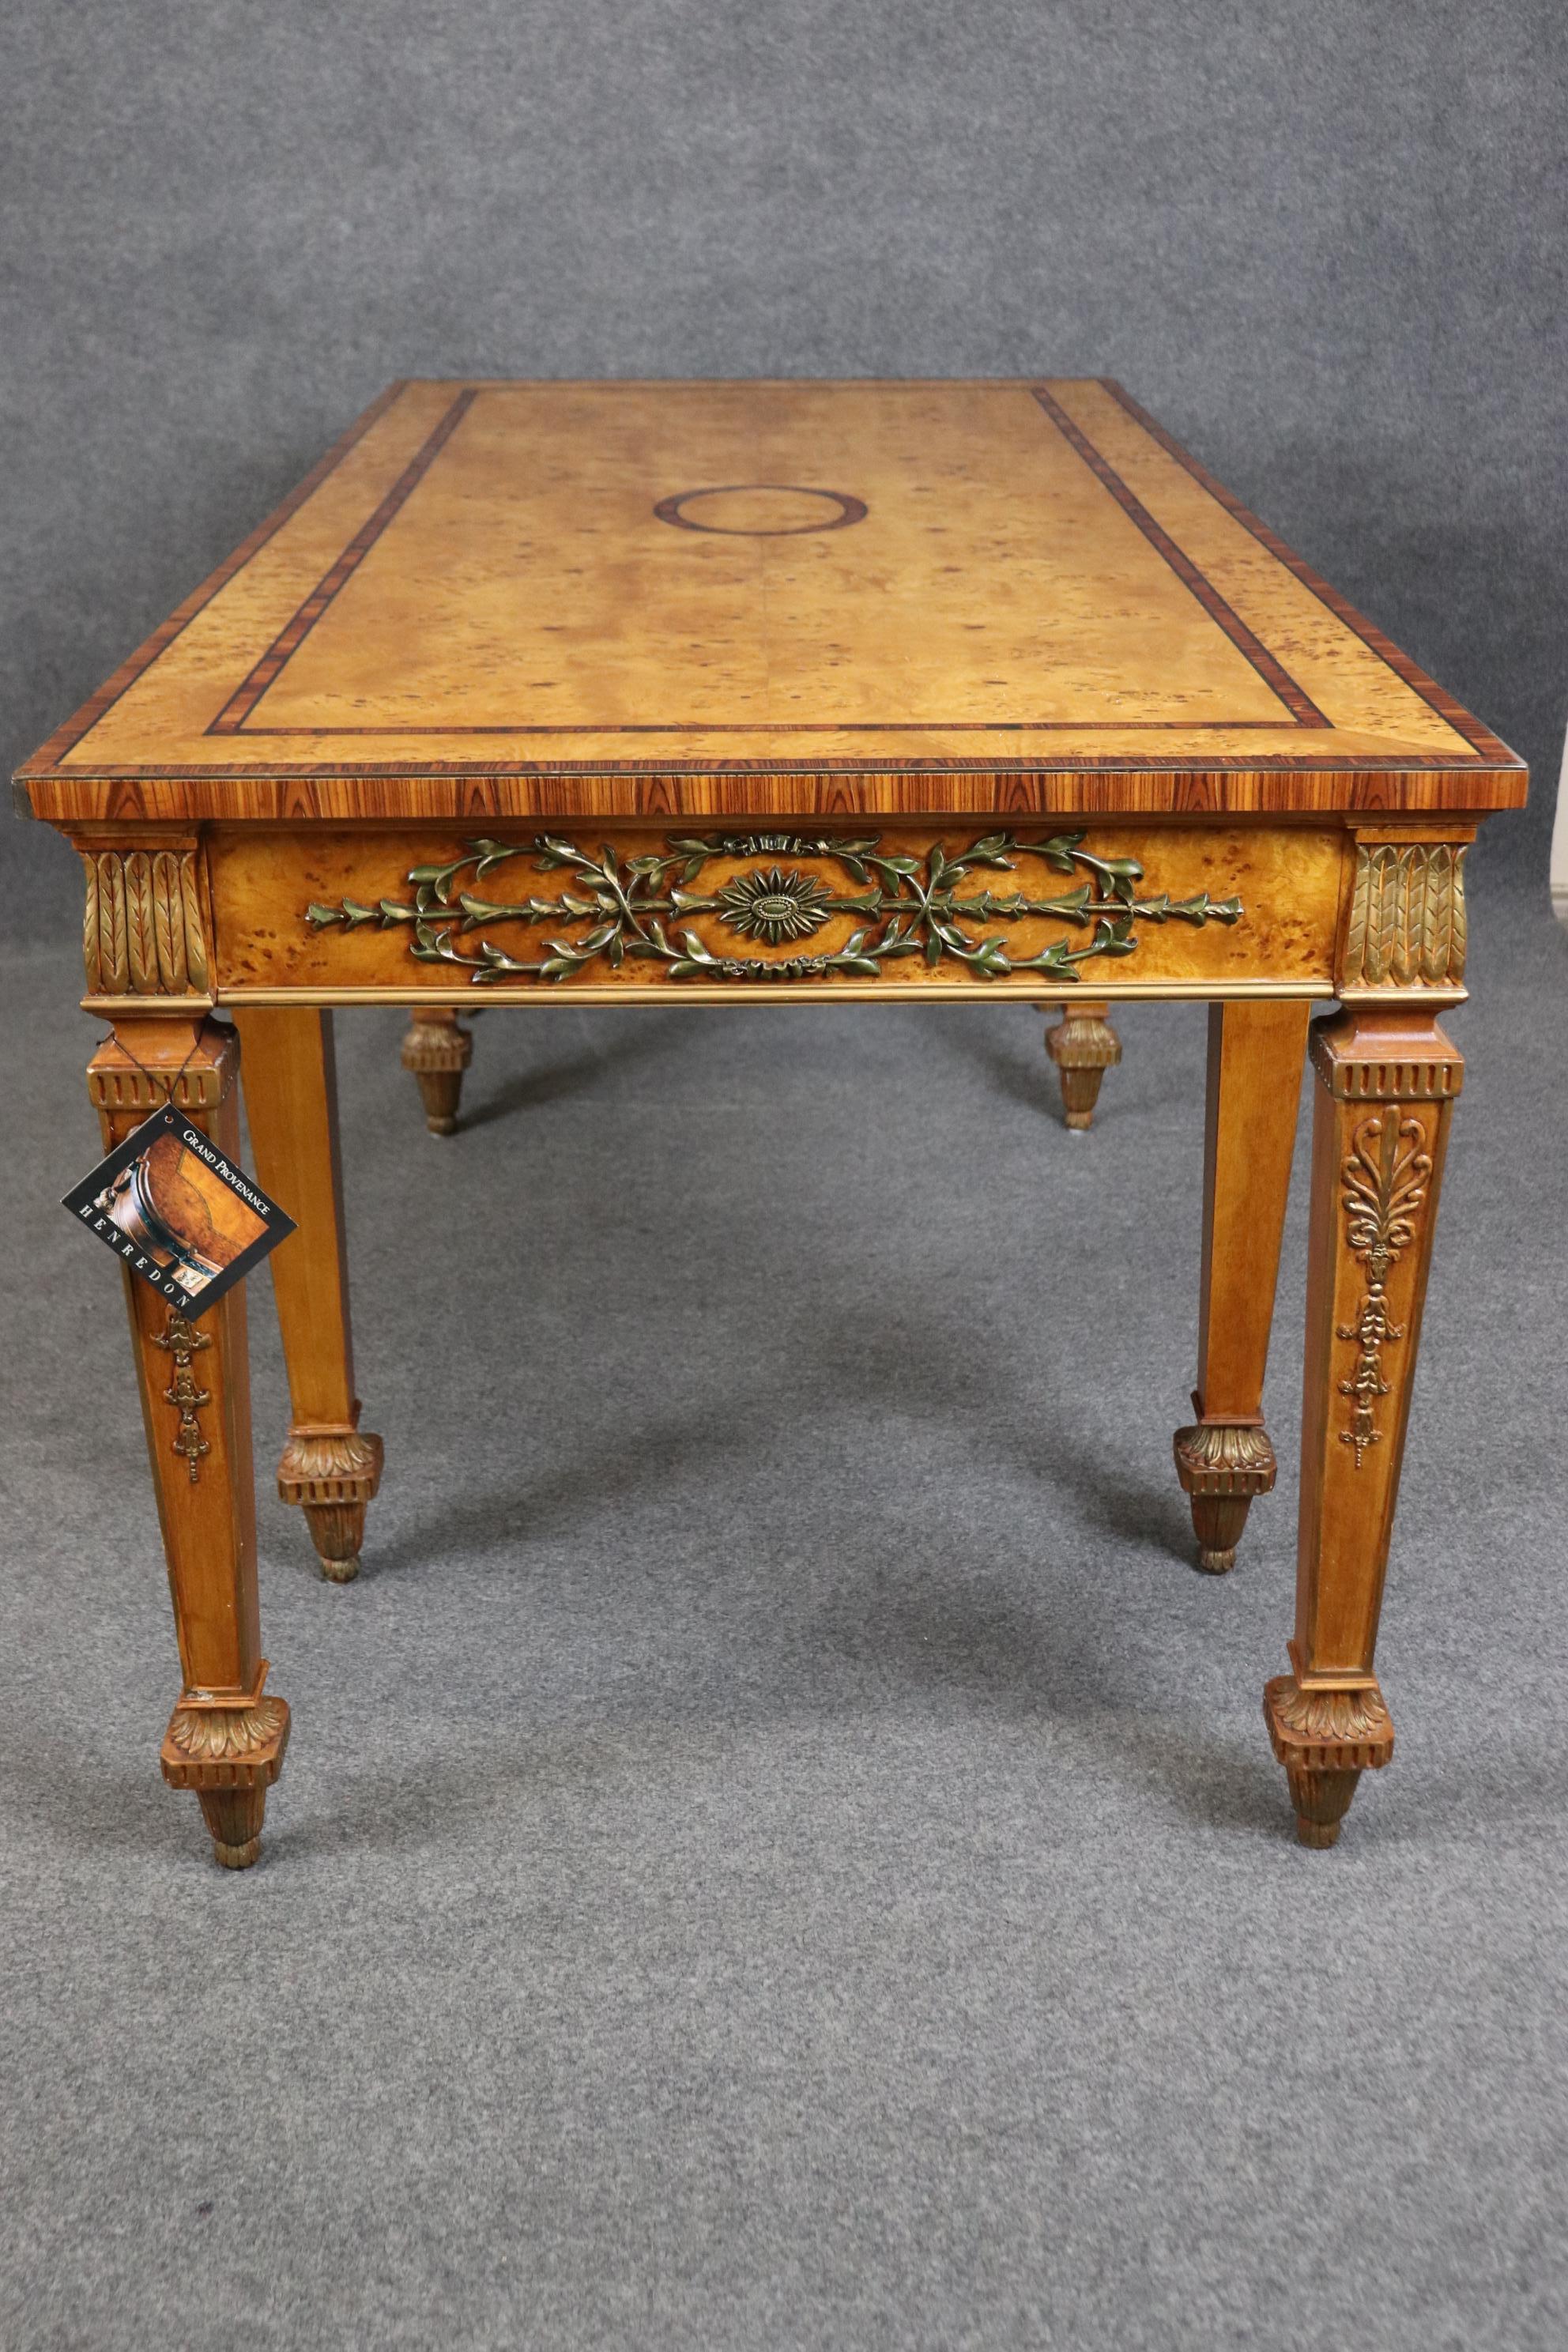 Sycamore Henredon Grand Provenance English Adams Style Decorated Carved Writing Desk 